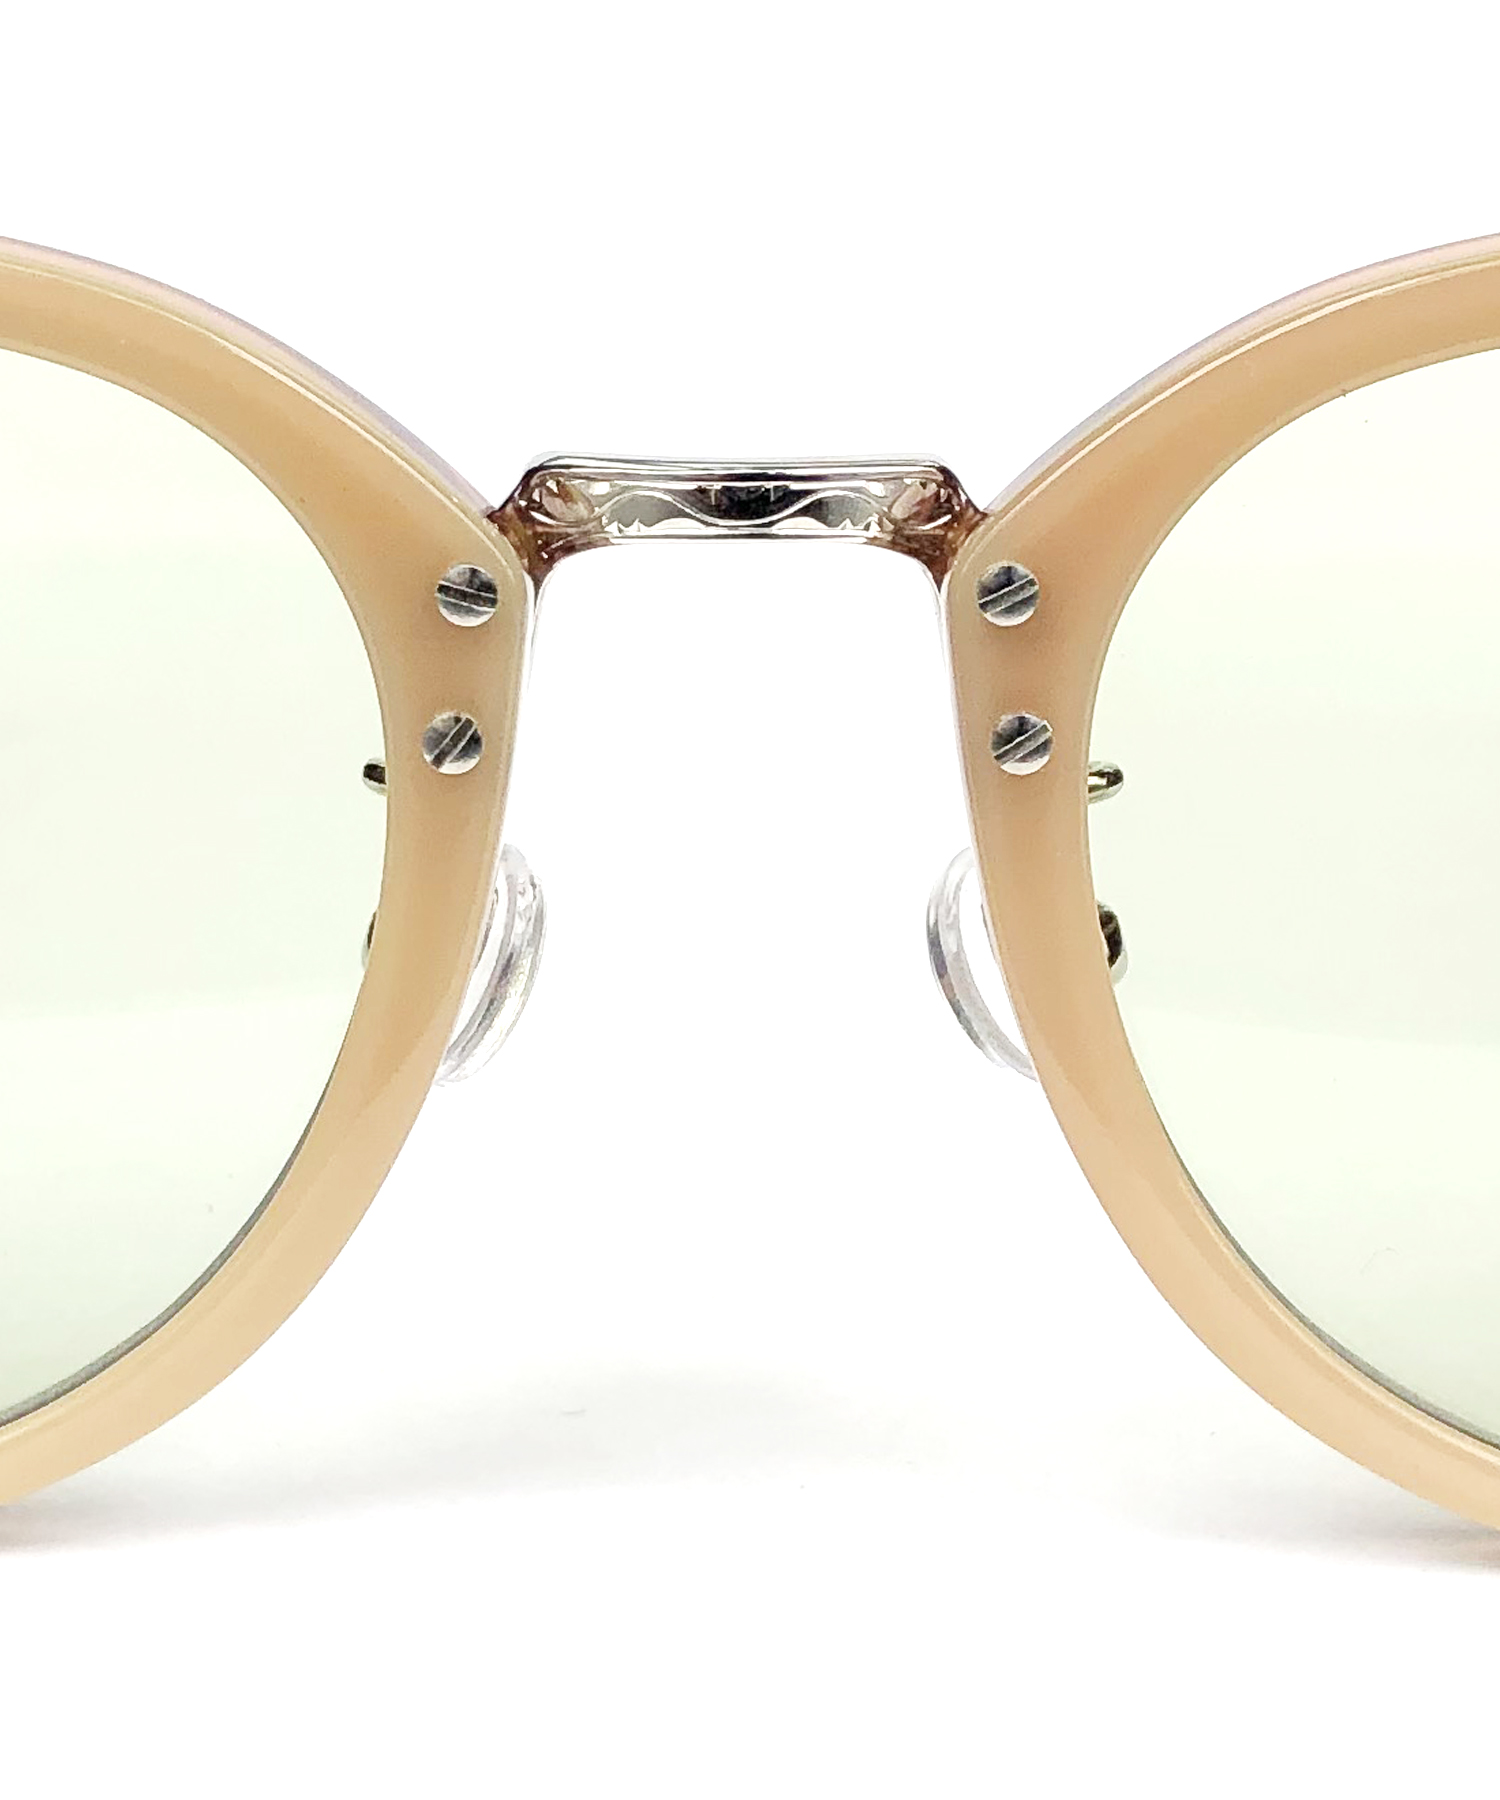 Session by STRUM Special Order Sunglasses - Beige – STRUM OFFICIAL